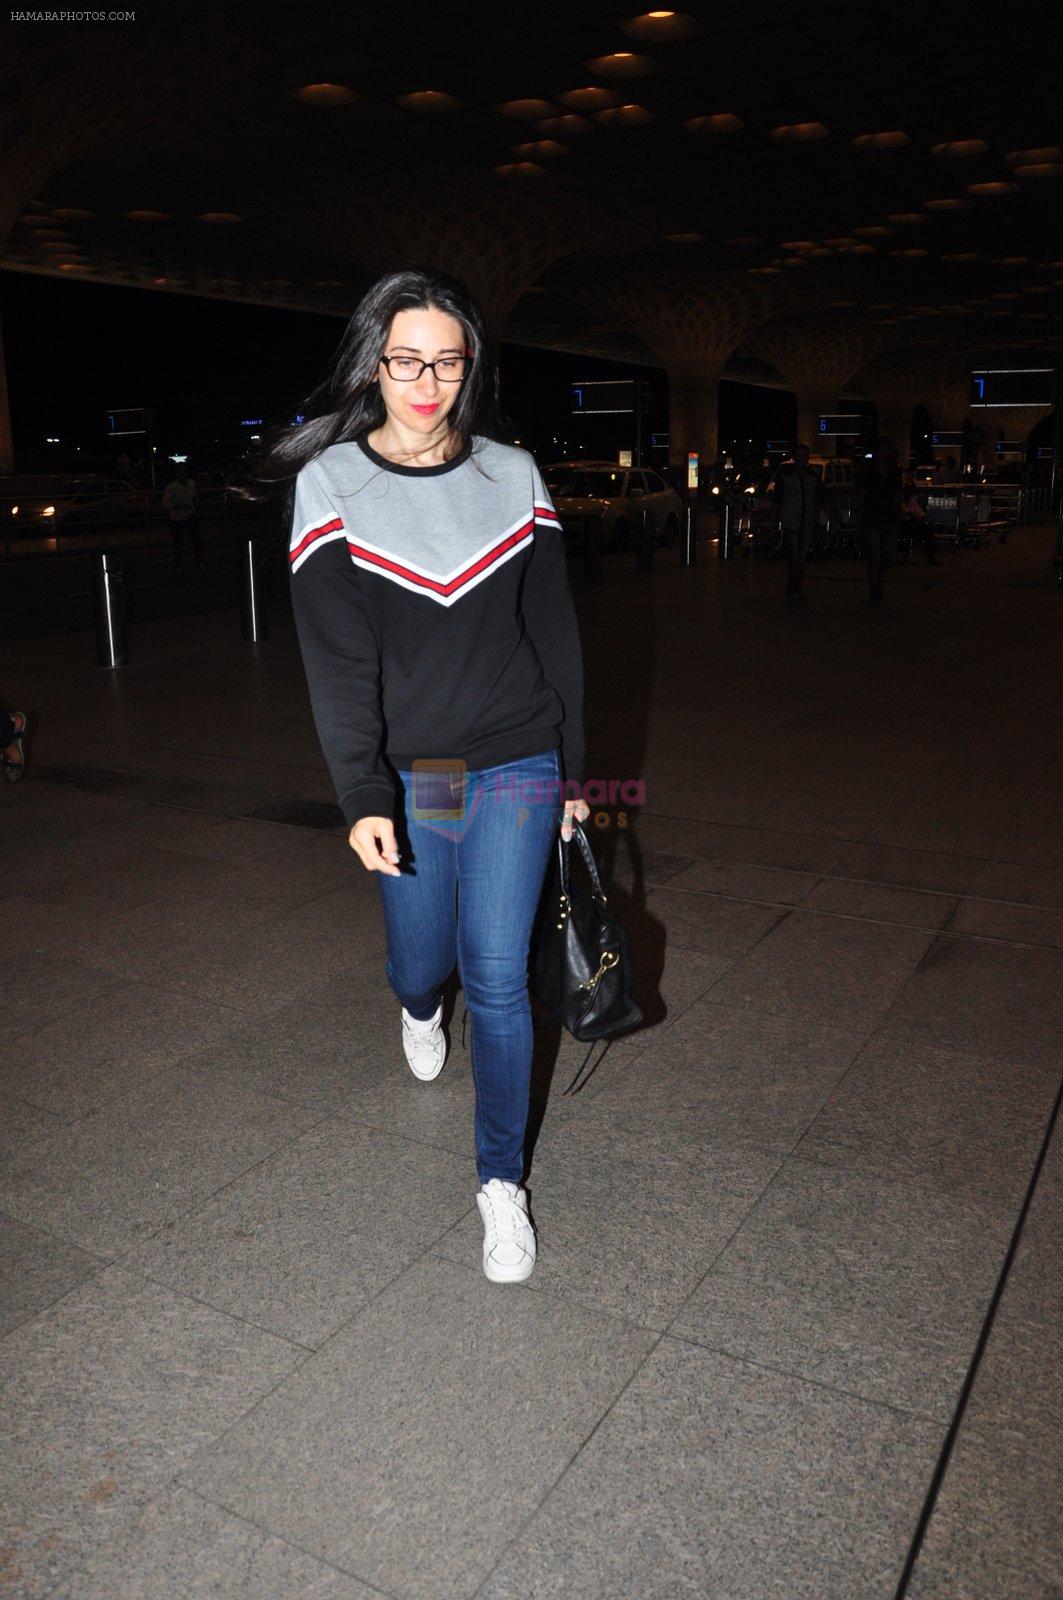 Karisma Kapoor snapped at airport on 4th Aug 2016